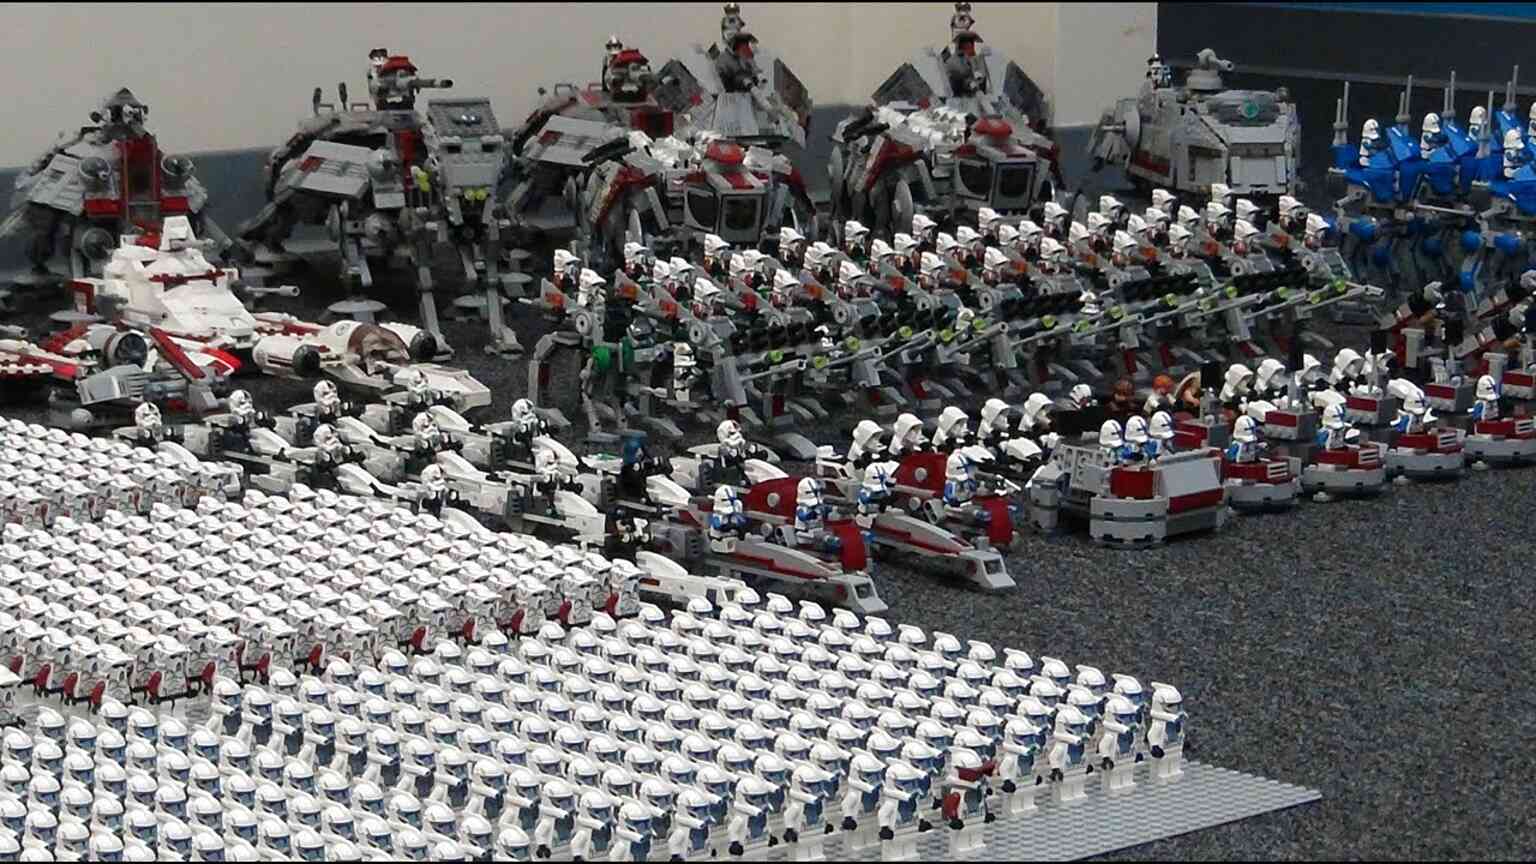 Lego Clone Trooper Army for sale in UK 40 used Lego Clone Trooper Armys